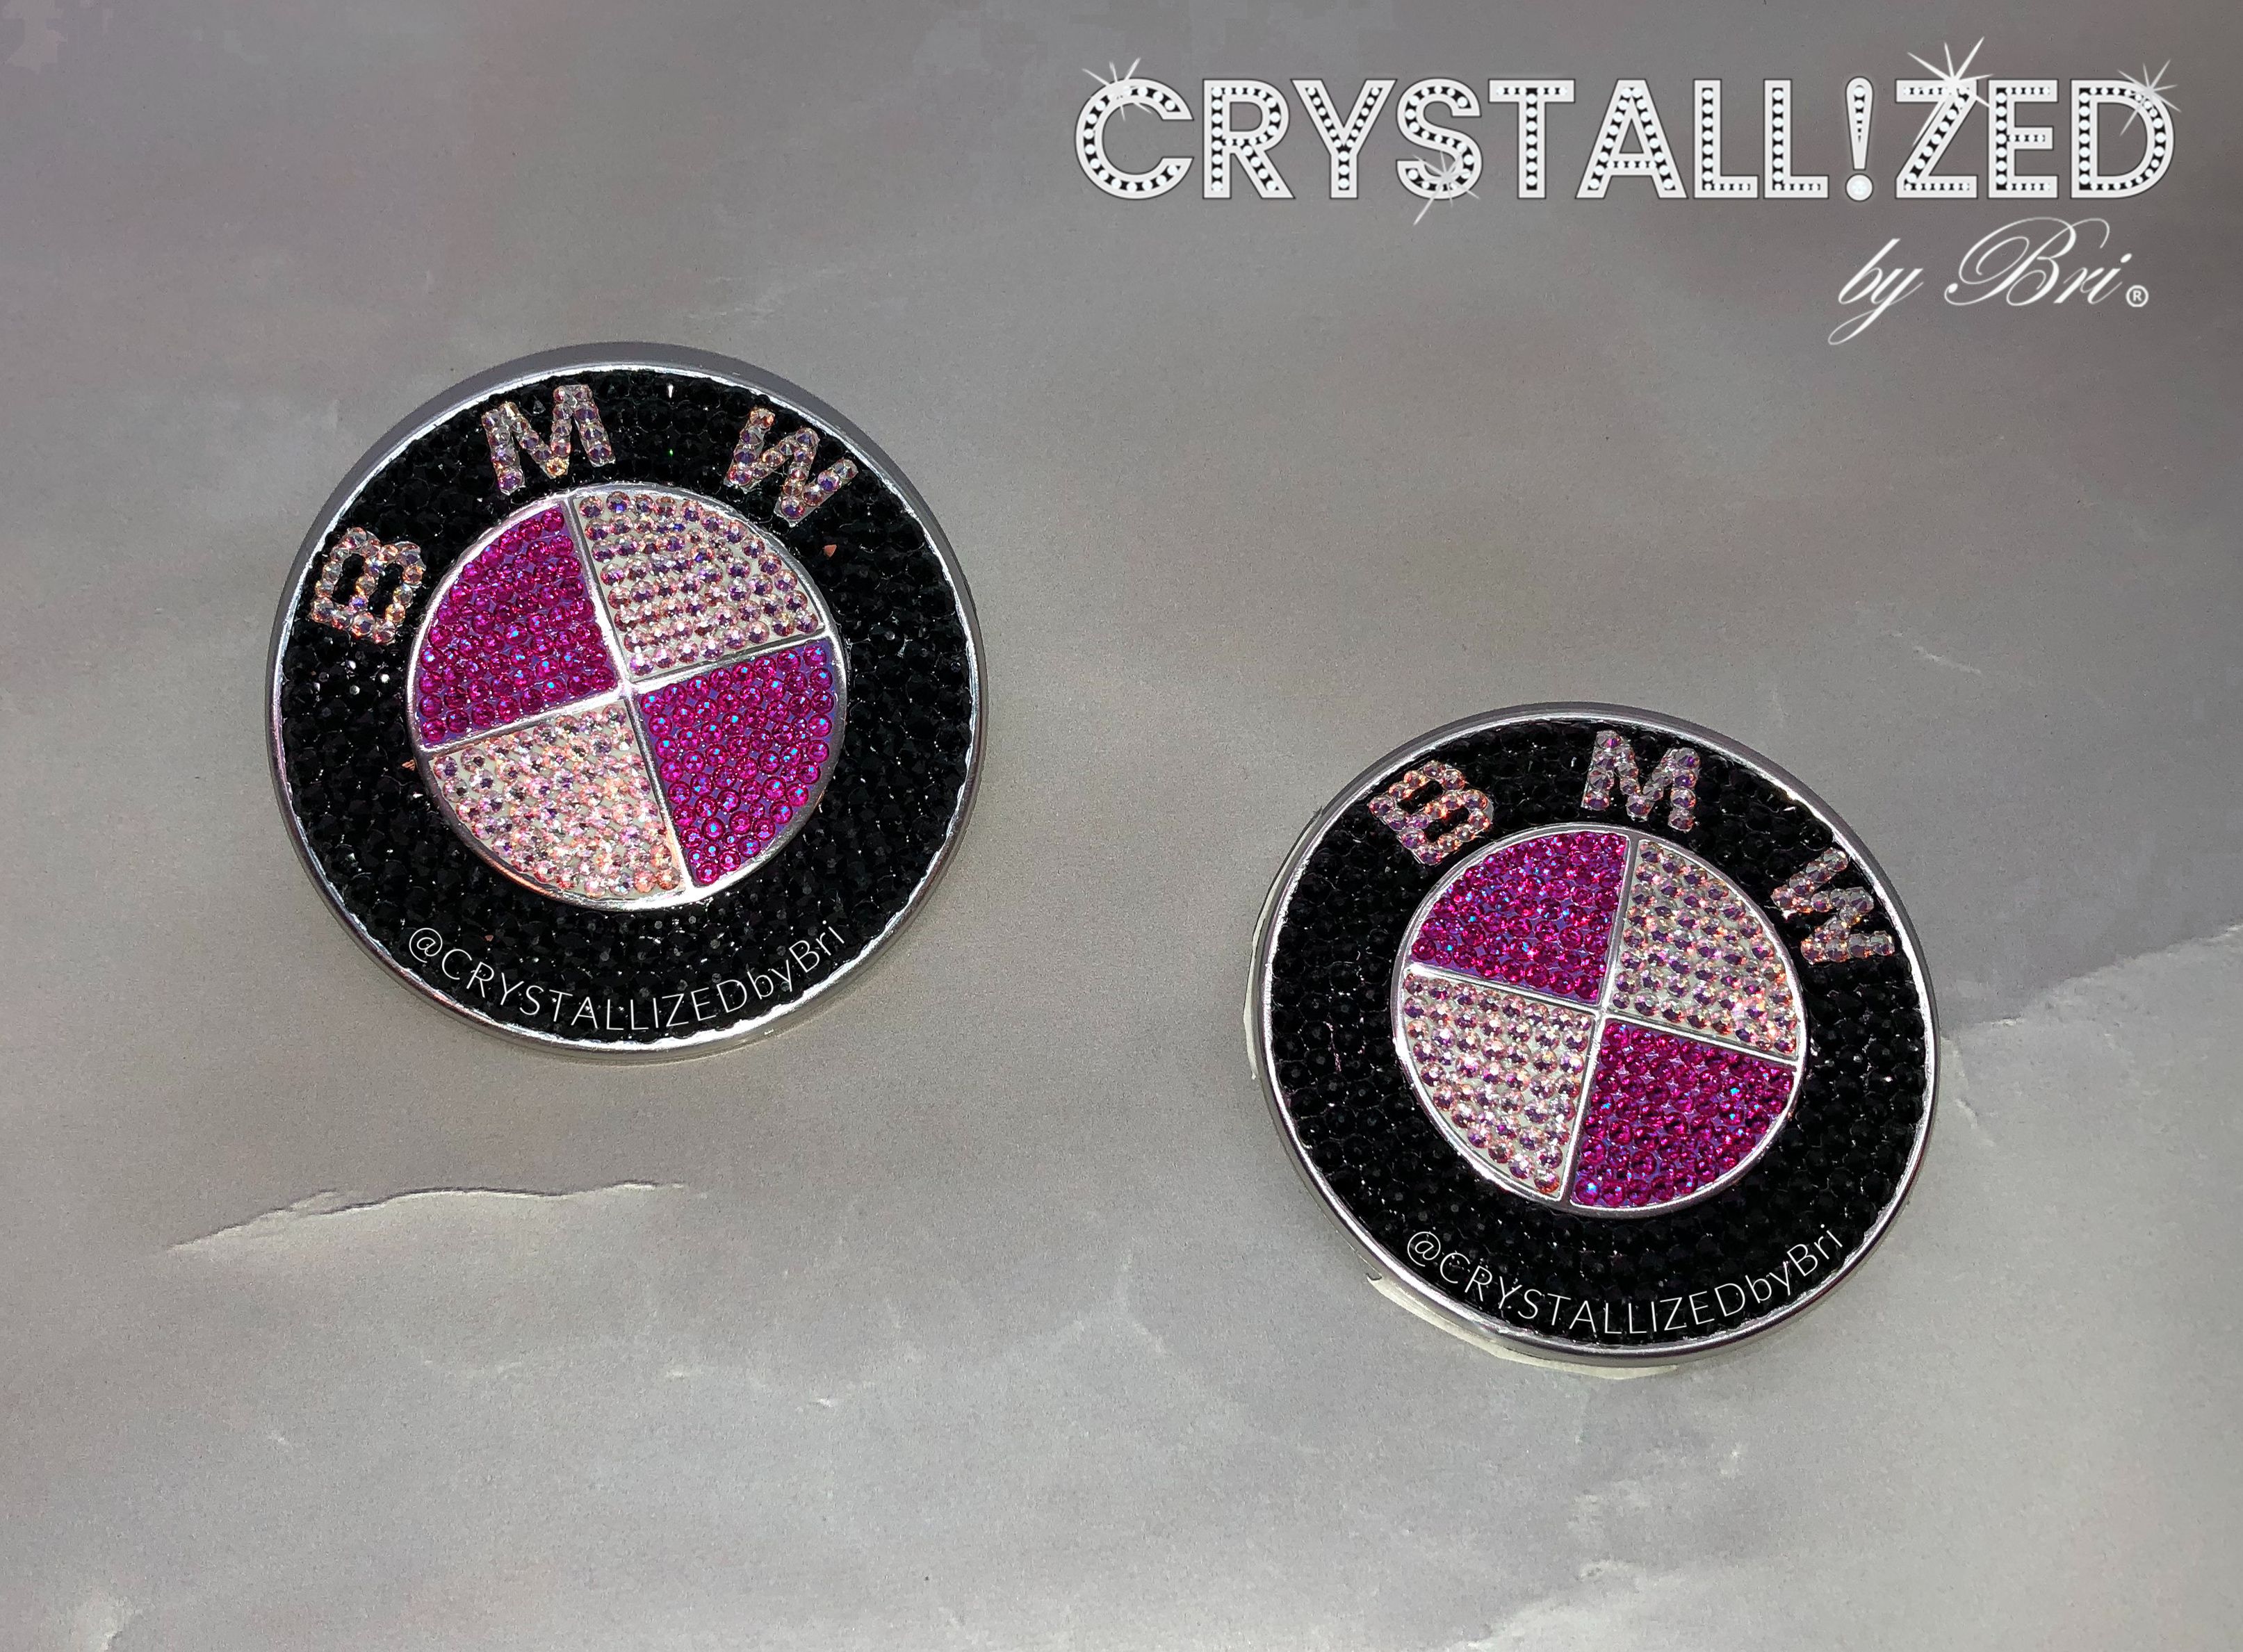 Buy Handmade Pink Bmw Crystallized Roundel Car Emblem Bling Genuine  European Crystals Bedazzled, made to order from CRYSTALL!ZED by Bri, LLC